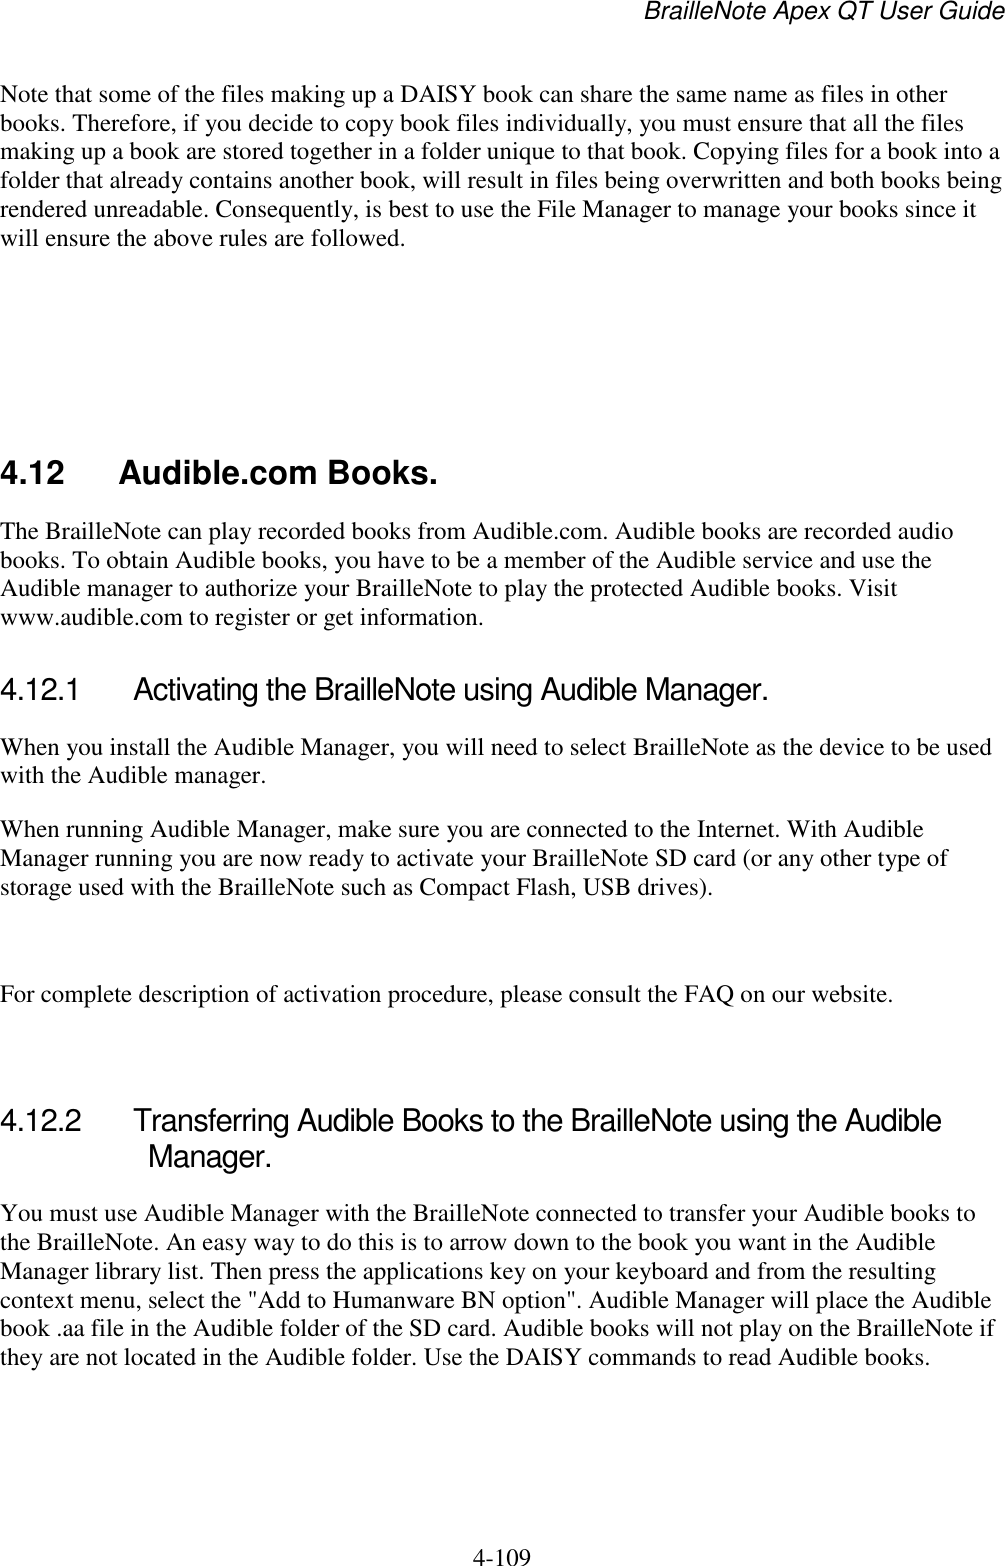 BrailleNote Apex QT User Guide  4-109   Note that some of the files making up a DAISY book can share the same name as files in other books. Therefore, if you decide to copy book files individually, you must ensure that all the files making up a book are stored together in a folder unique to that book. Copying files for a book into a folder that already contains another book, will result in files being overwritten and both books being rendered unreadable. Consequently, is best to use the File Manager to manage your books since it will ensure the above rules are followed.     4.12  Audible.com Books. The BrailleNote can play recorded books from Audible.com. Audible books are recorded audio books. To obtain Audible books, you have to be a member of the Audible service and use the Audible manager to authorize your BrailleNote to play the protected Audible books. Visit www.audible.com to register or get information.   4.12.1  Activating the BrailleNote using Audible Manager. When you install the Audible Manager, you will need to select BrailleNote as the device to be used with the Audible manager.  When running Audible Manager, make sure you are connected to the Internet. With Audible Manager running you are now ready to activate your BrailleNote SD card (or any other type of storage used with the BrailleNote such as Compact Flash, USB drives).   For complete description of activation procedure, please consult the FAQ on our website.   4.12.2  Transferring Audible Books to the BrailleNote using the Audible Manager. You must use Audible Manager with the BrailleNote connected to transfer your Audible books to the BrailleNote. An easy way to do this is to arrow down to the book you want in the Audible Manager library list. Then press the applications key on your keyboard and from the resulting context menu, select the &quot;Add to Humanware BN option&quot;. Audible Manager will place the Audible book .aa file in the Audible folder of the SD card. Audible books will not play on the BrailleNote if they are not located in the Audible folder. Use the DAISY commands to read Audible books.   